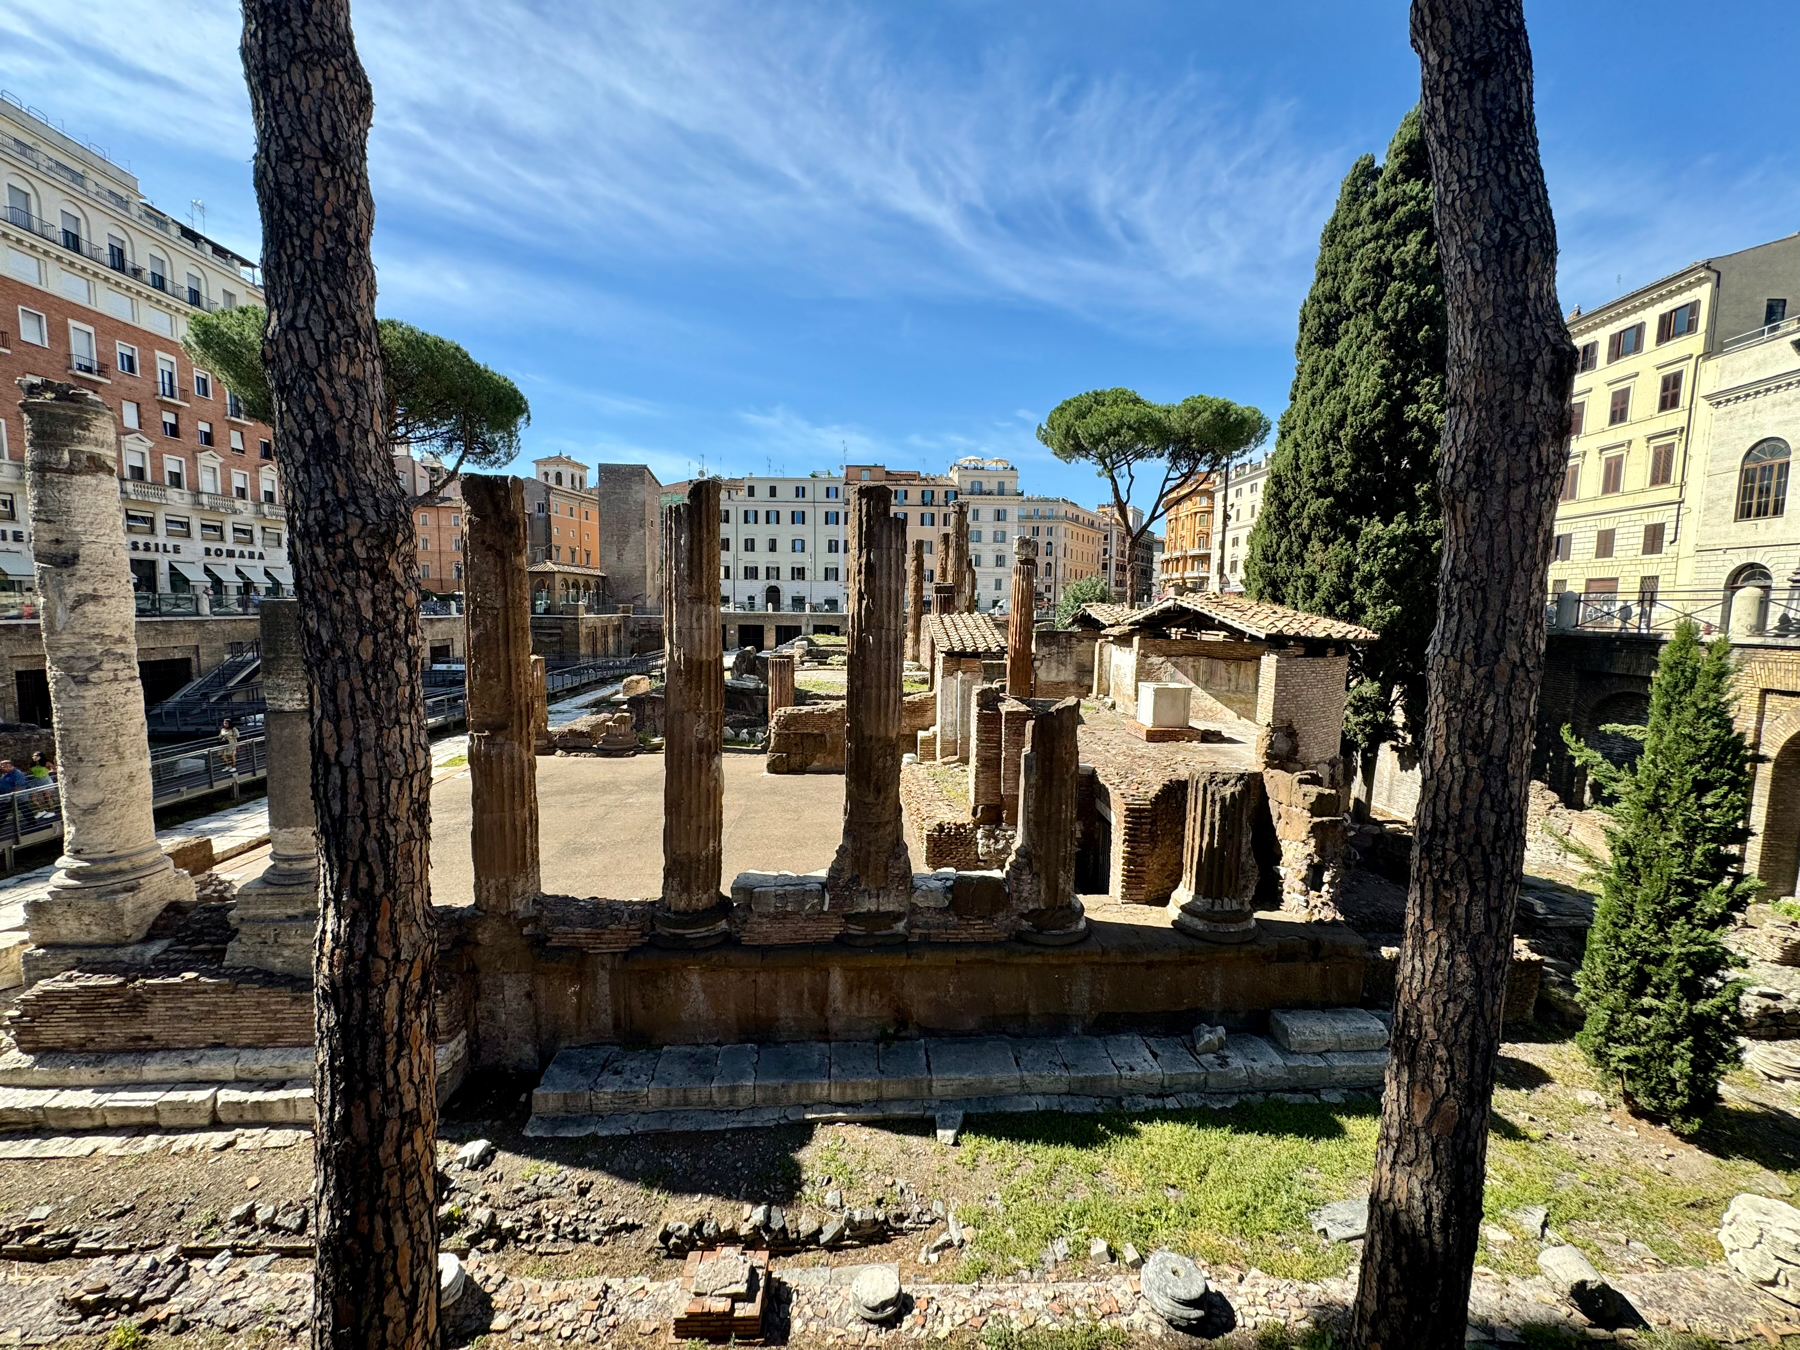 The image depicts the ruins of an ancient Roman temple complex, surrounded by modern buildings, some trees, and columns. The sky is clear and sunny.